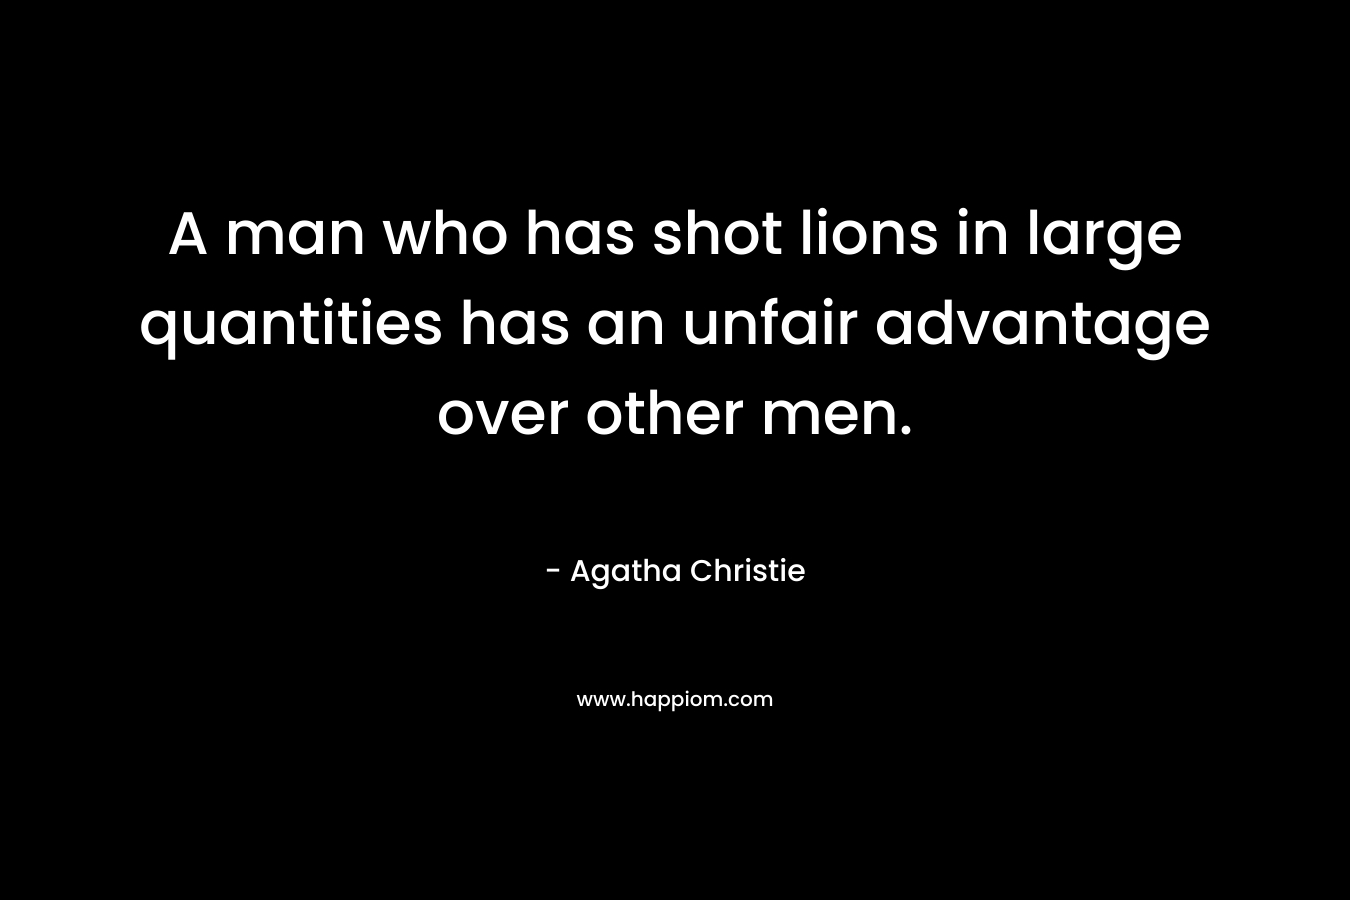 A man who has shot lions in large quantities has an unfair advantage over other men. – Agatha Christie